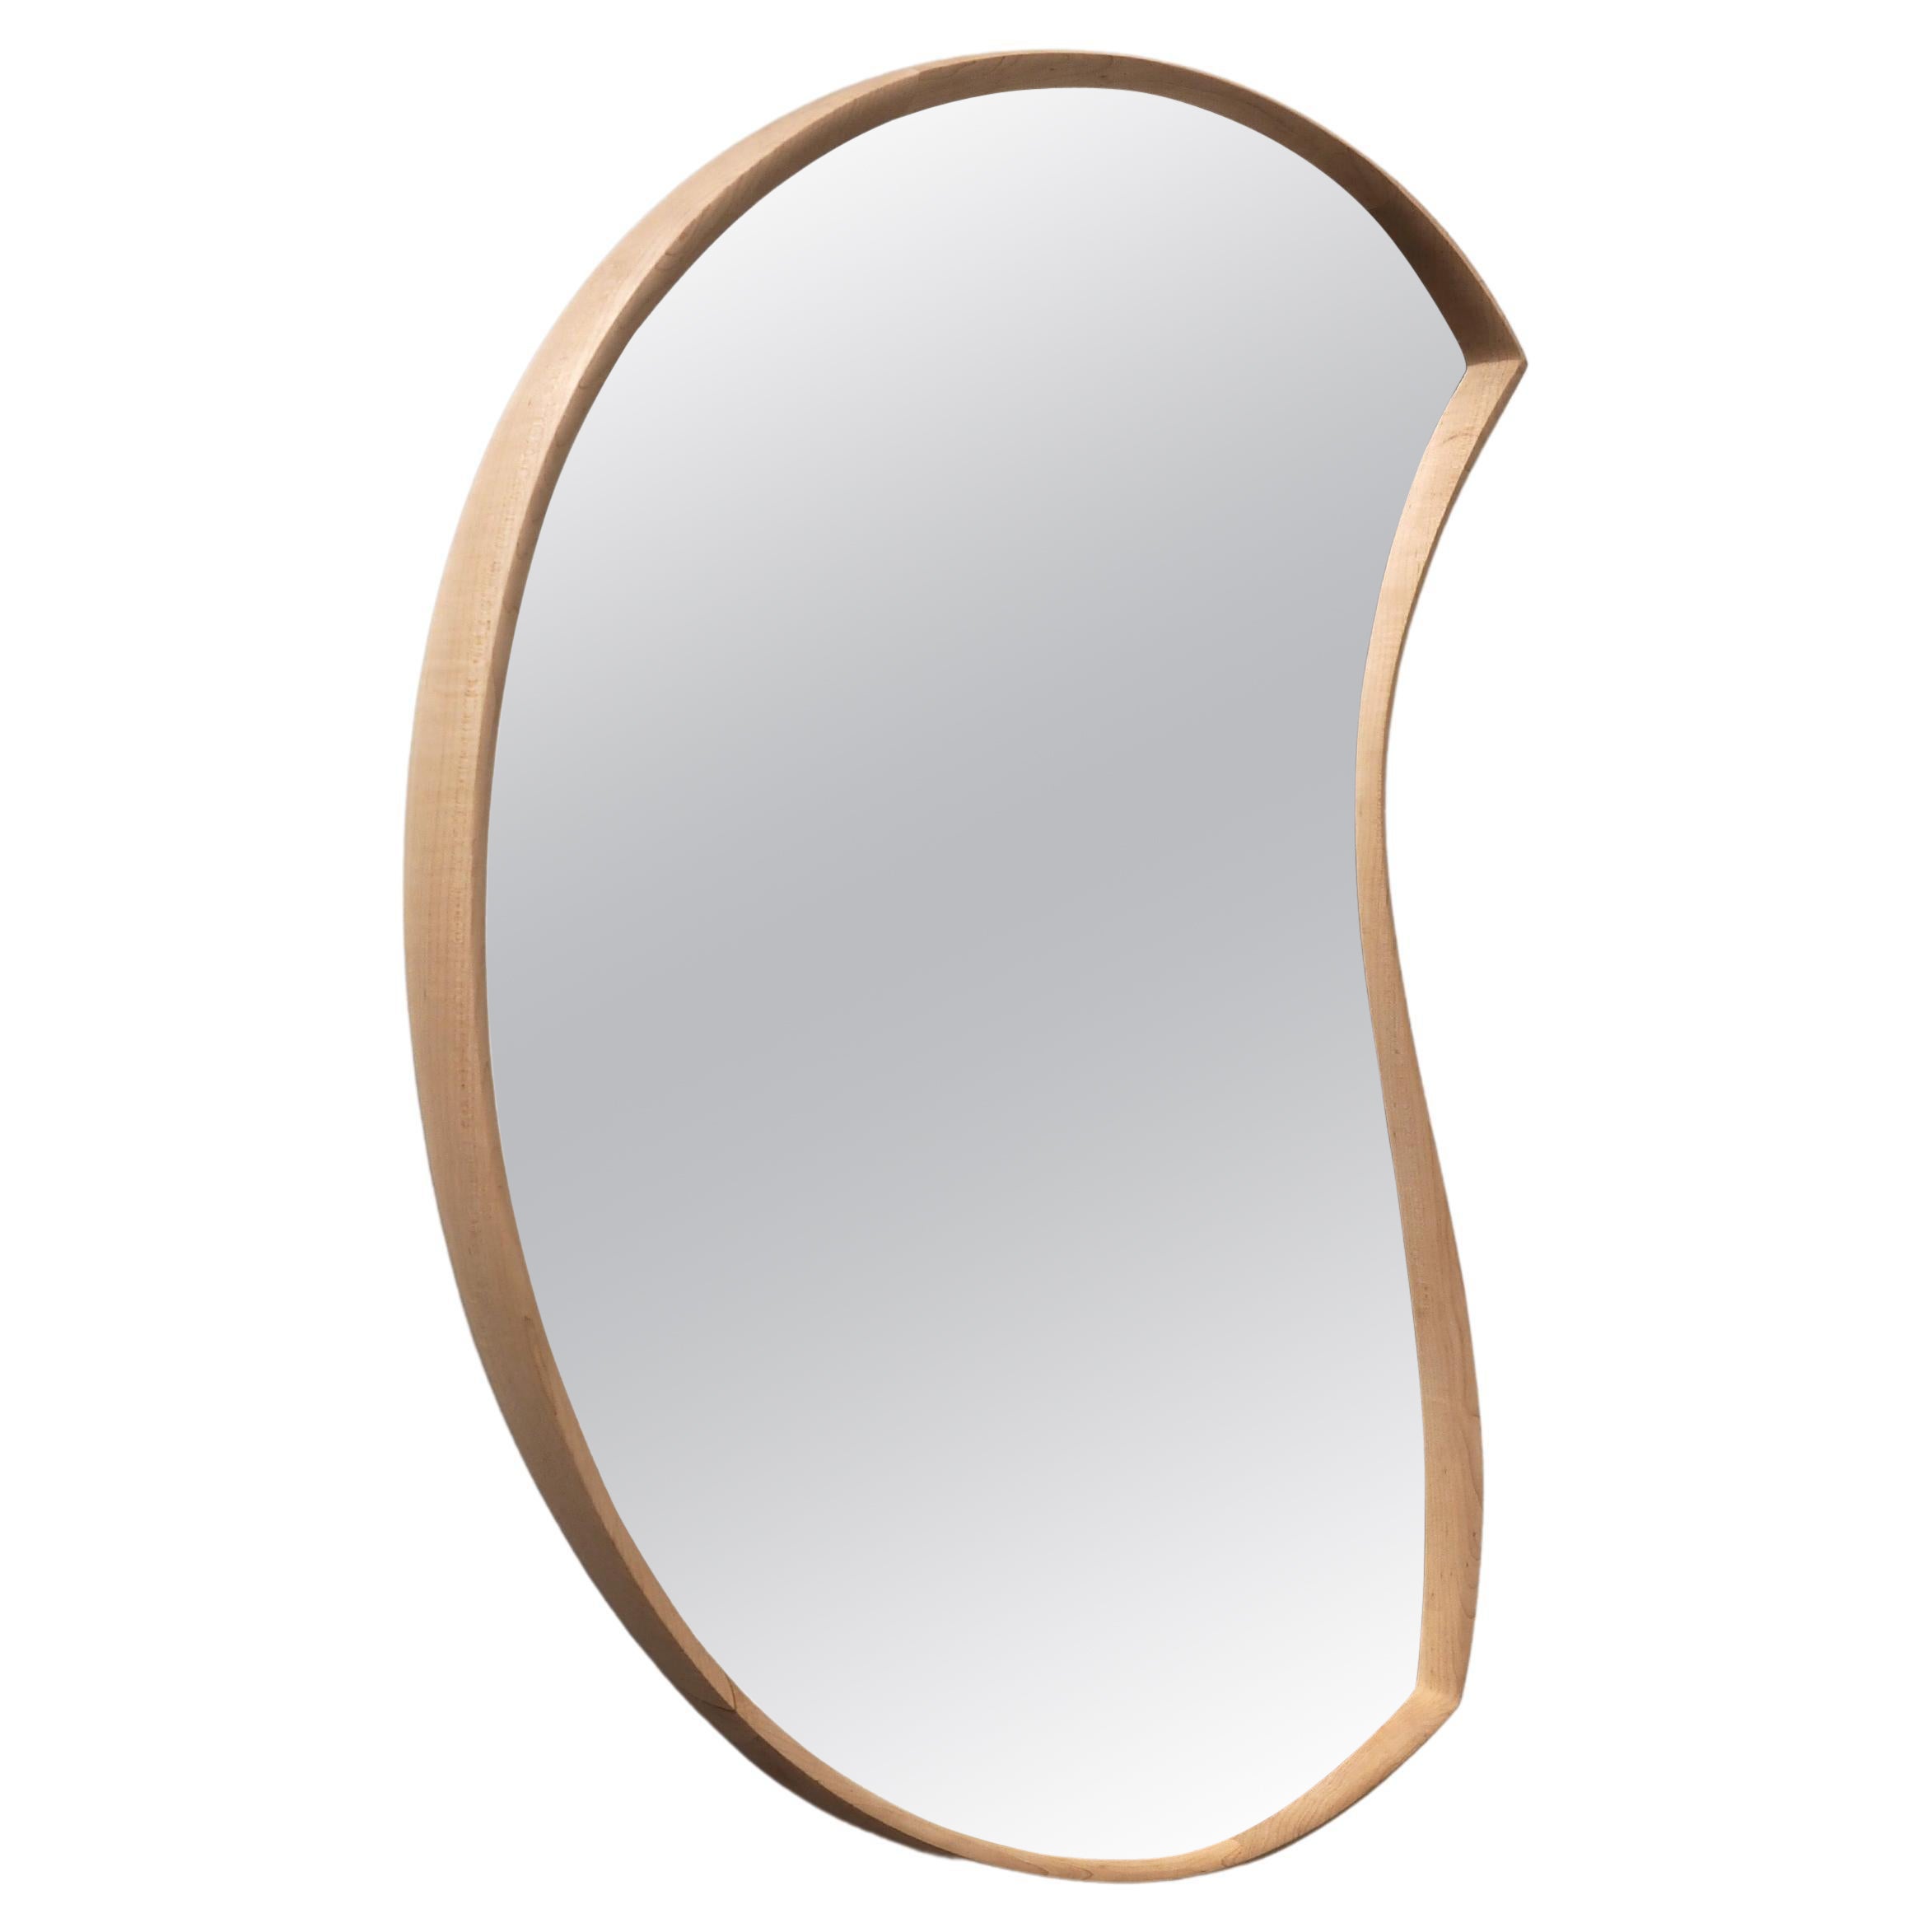 'Moon Mirror' by Soo Joo is a wooden wall mirror with a timeless and asymmetric form. Moon Mirror is hung with a custom-made steel french cleat and hangs flush on the wall. This is the slightly larger version, at 95 x 55 cm in size.  

This mirror